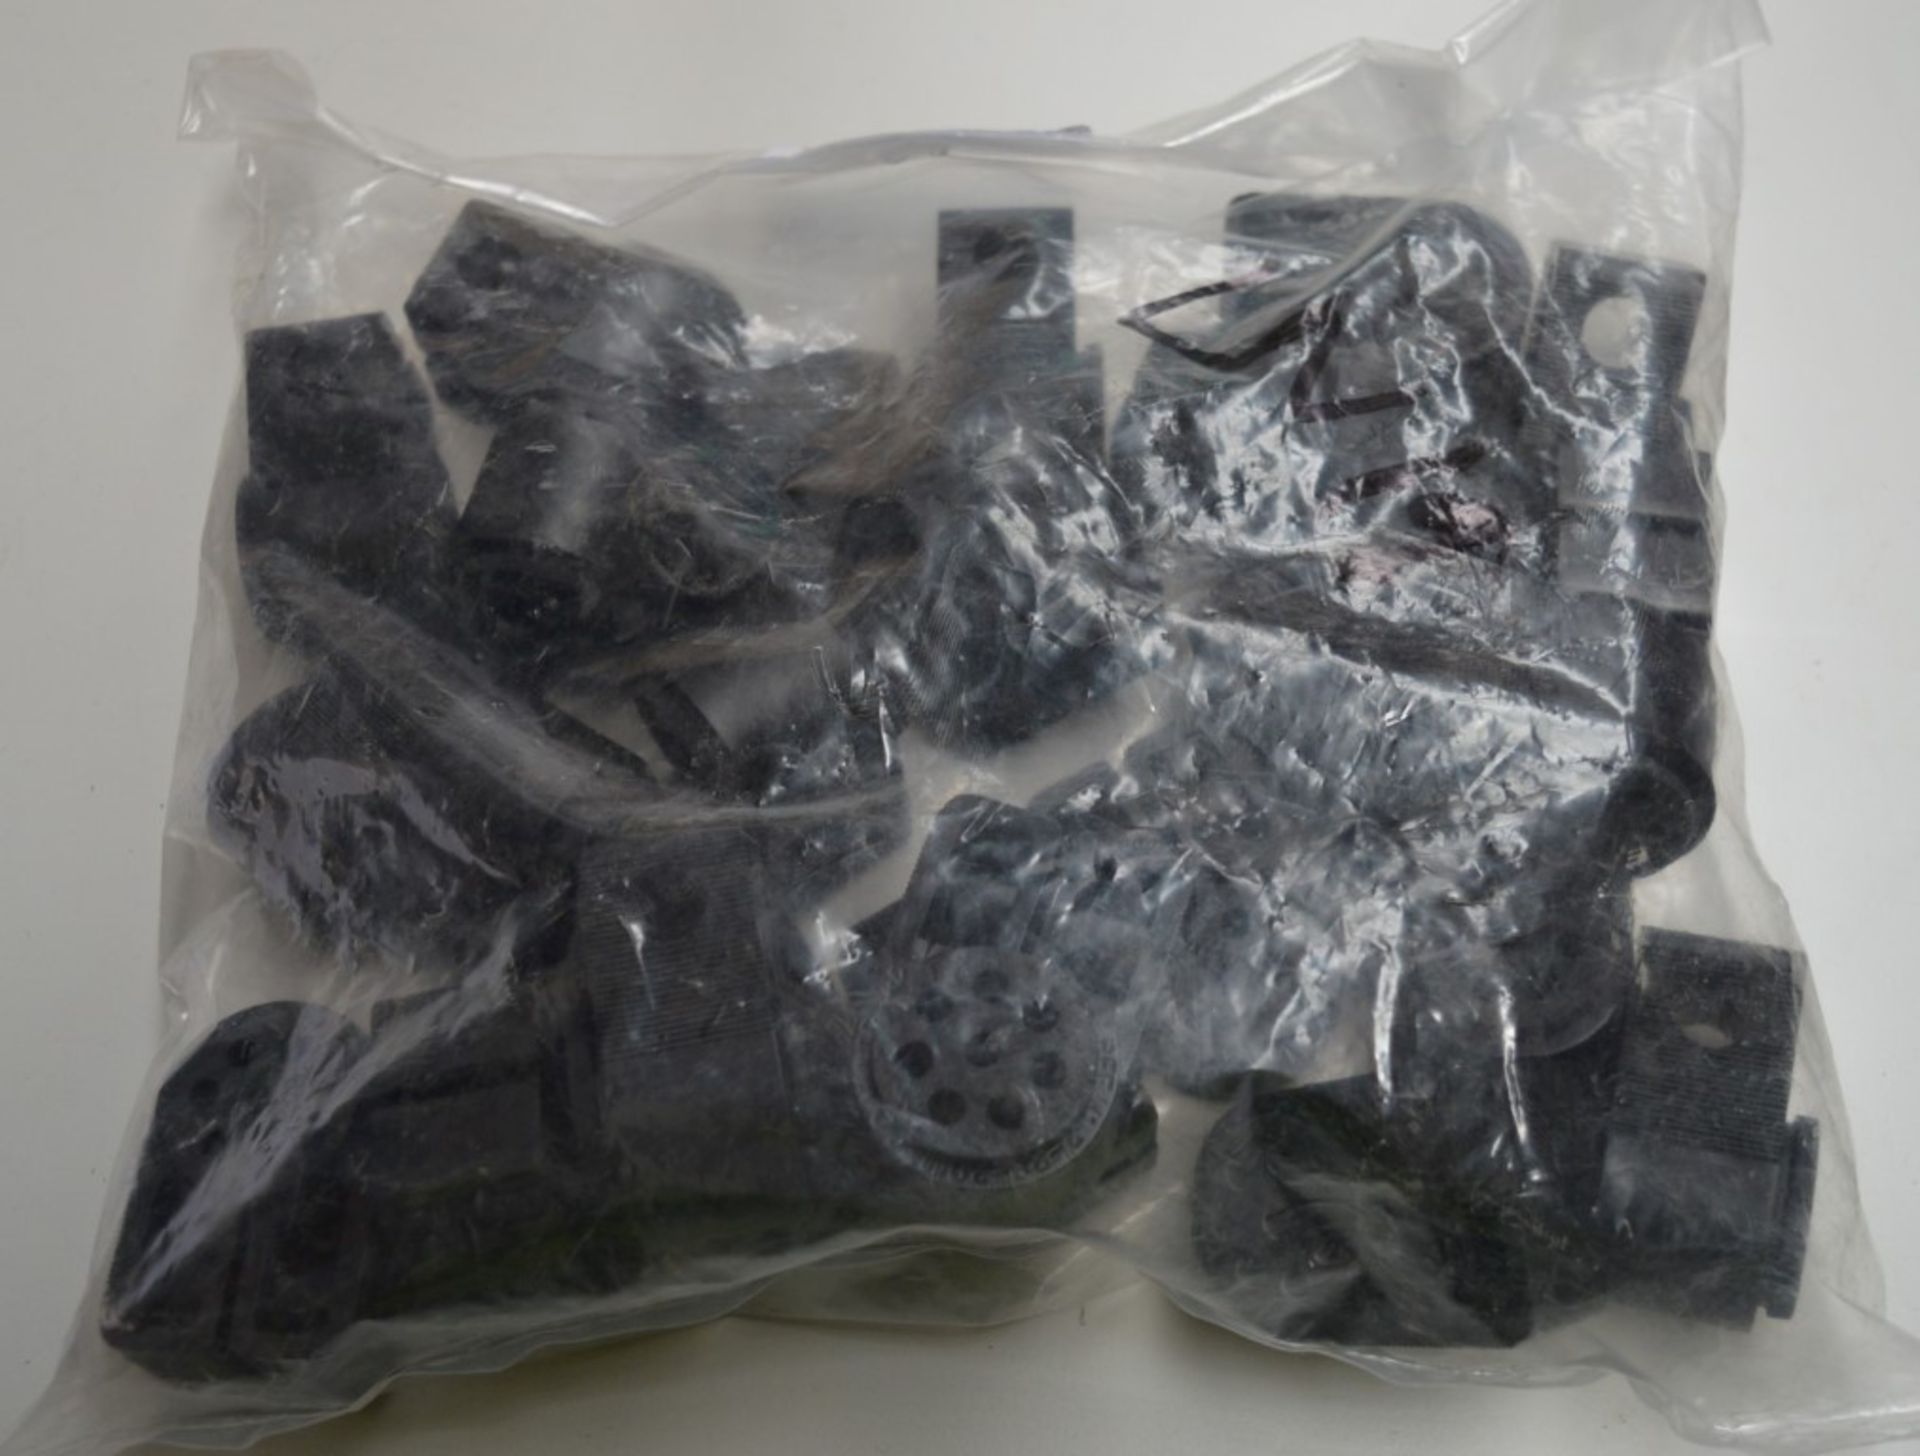 25 x Black Cleats With 8 x 4.8mm Hole Cable Bungs - Unused Bag of 25 - Type GCA BW1.2 HS8 - - Image 8 of 12